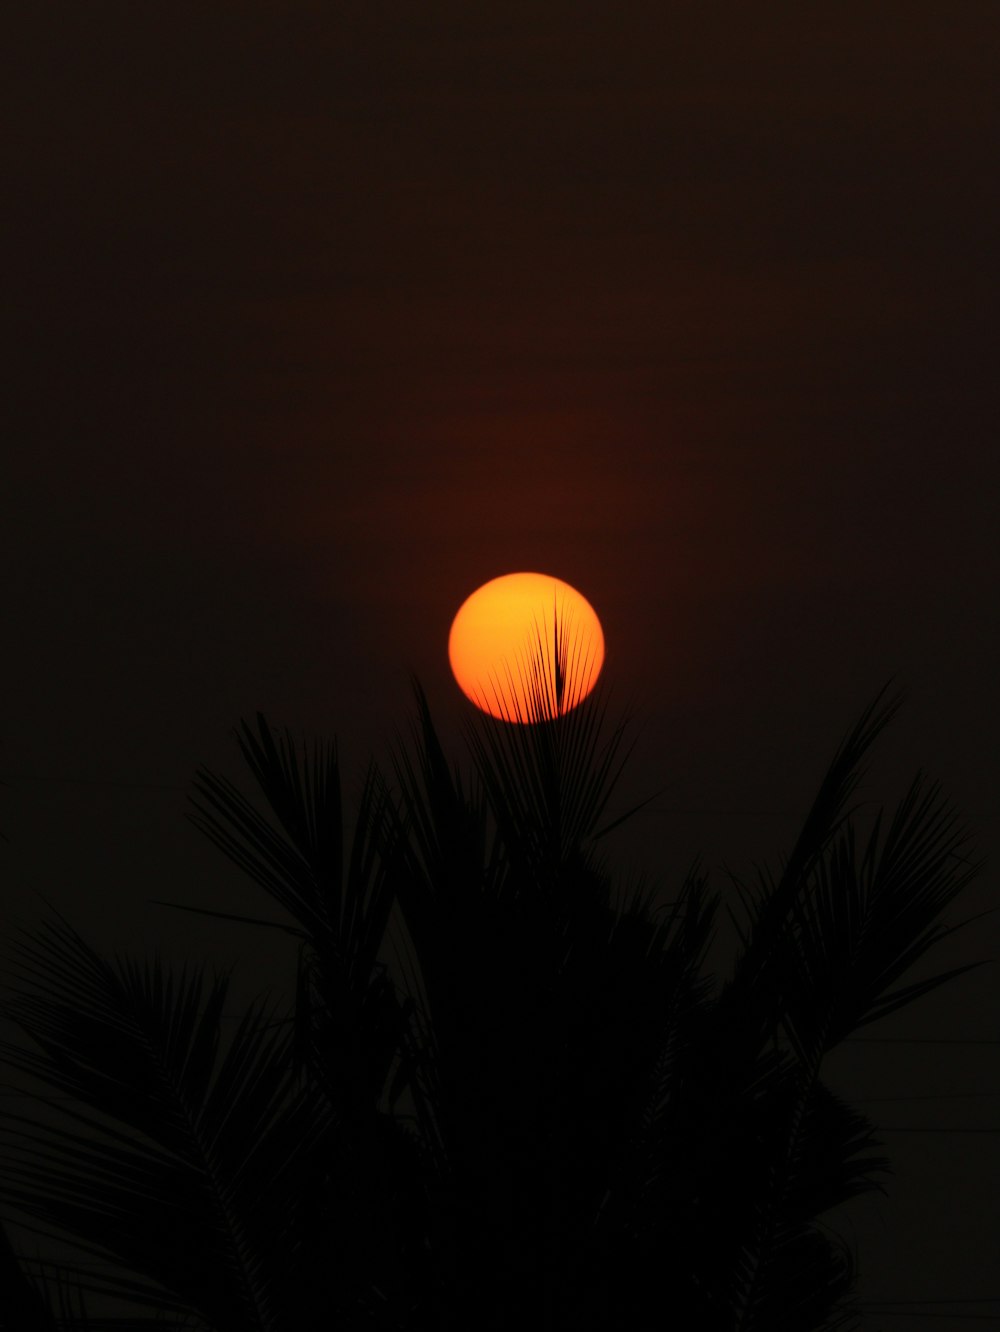 the sun is setting behind a palm tree